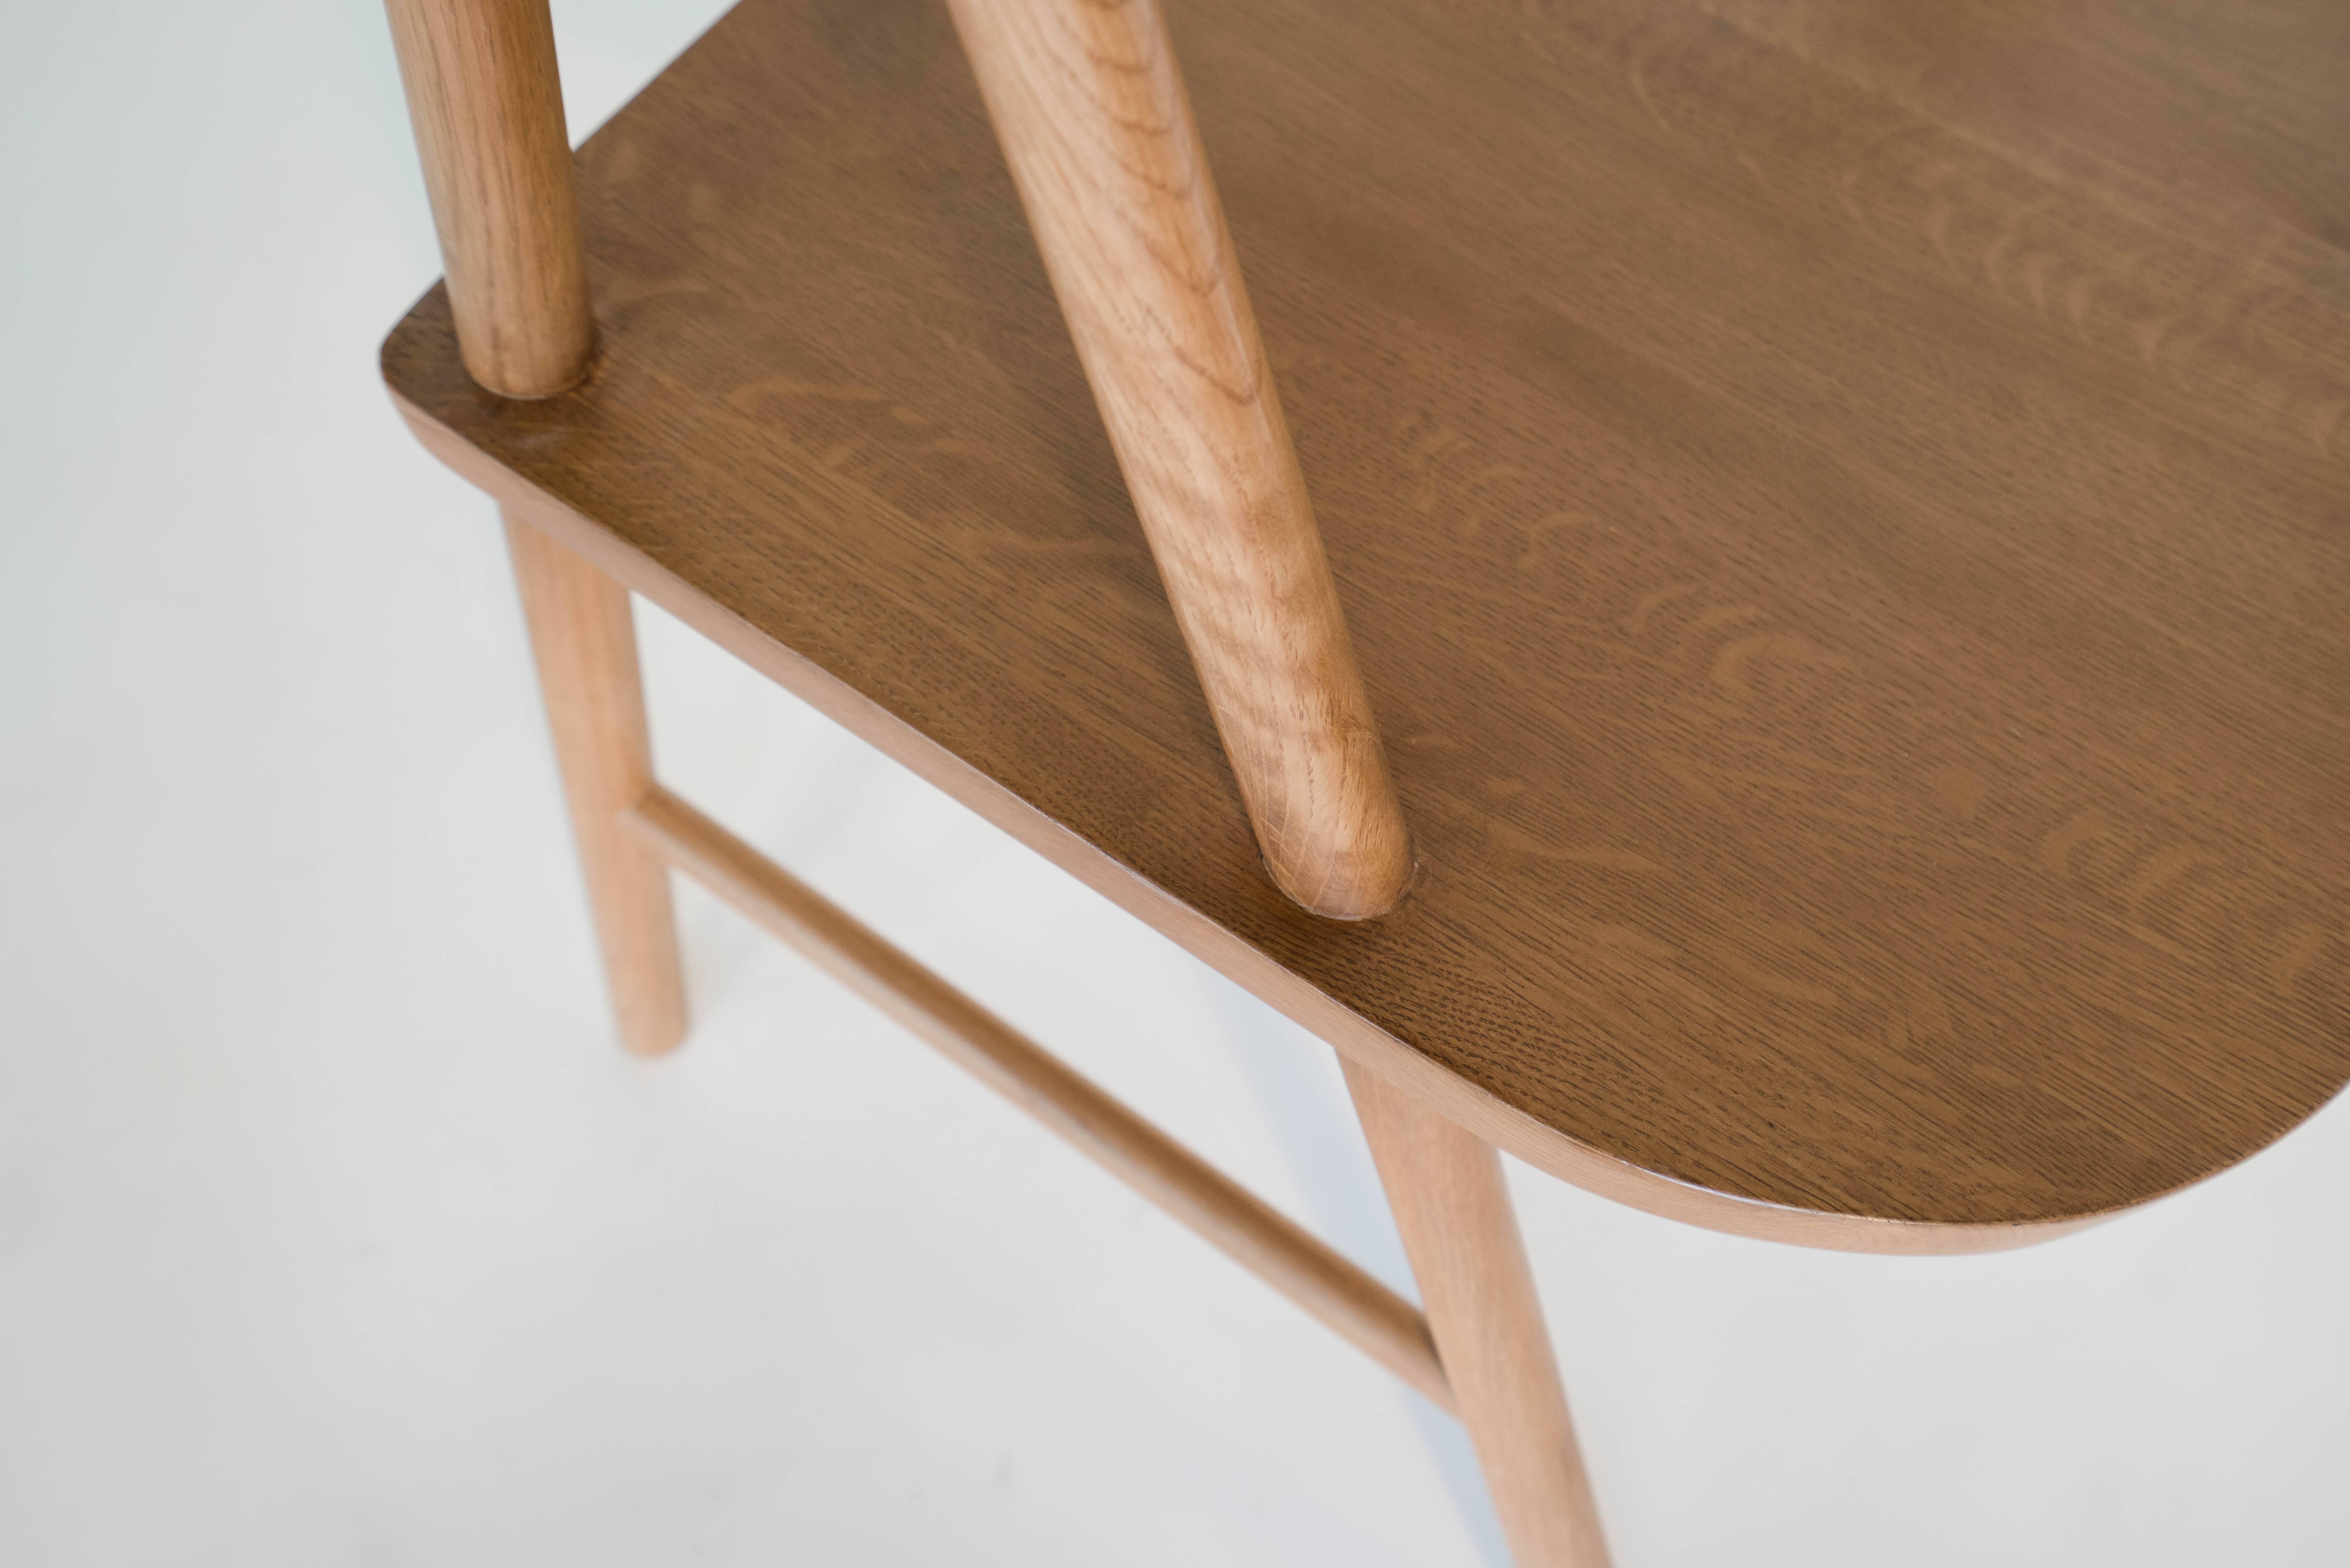 Cress Chair by Sun at Six, Sienna Minimalist Dining Chair in Wood, Leather In New Condition For Sale In San Jose, CA